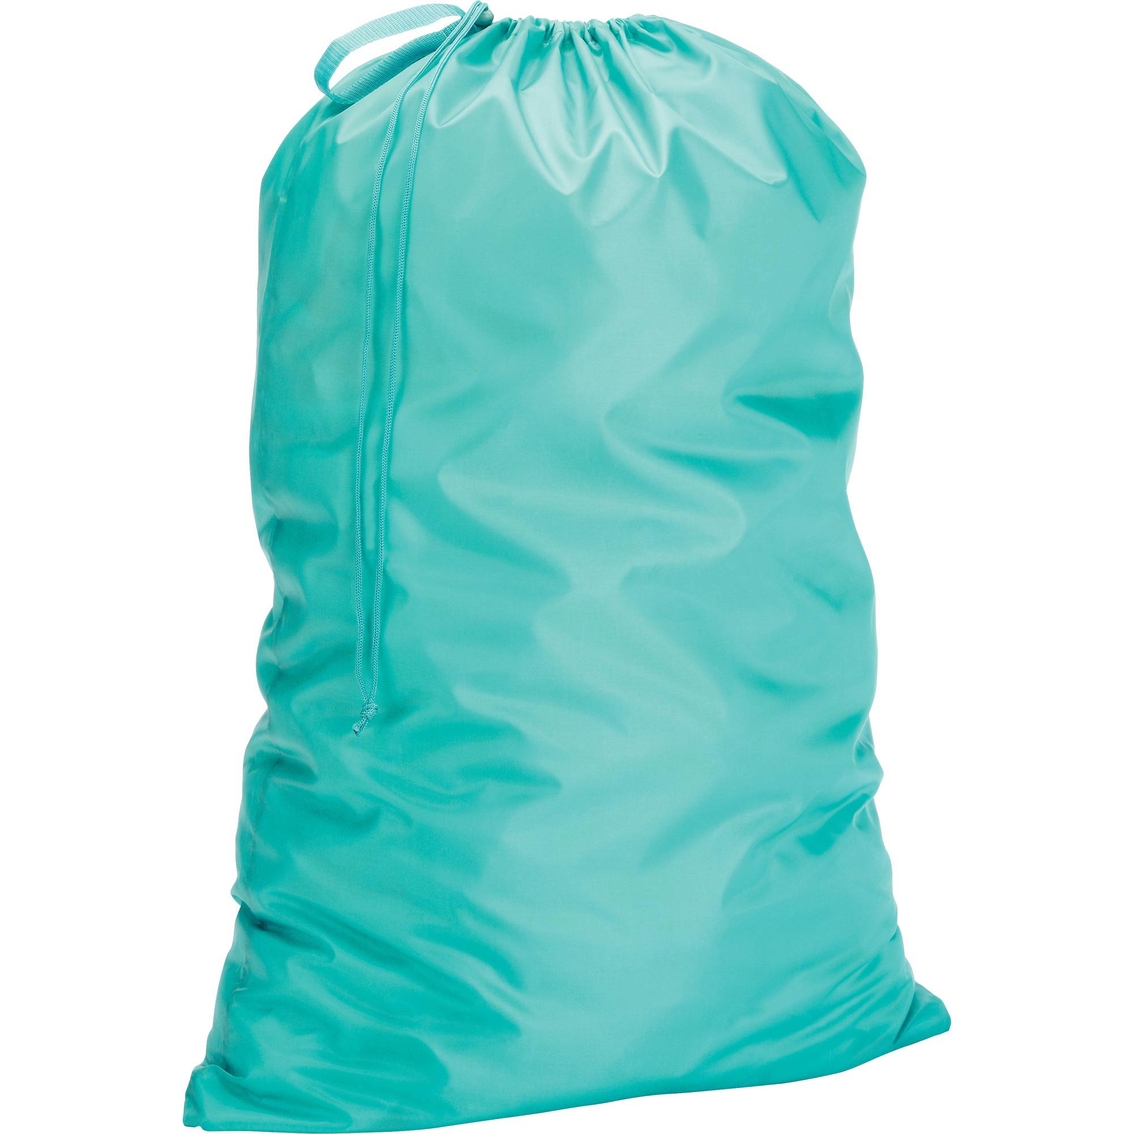 Whitmor Dura Clean Laundry Bag - Image 2 of 7